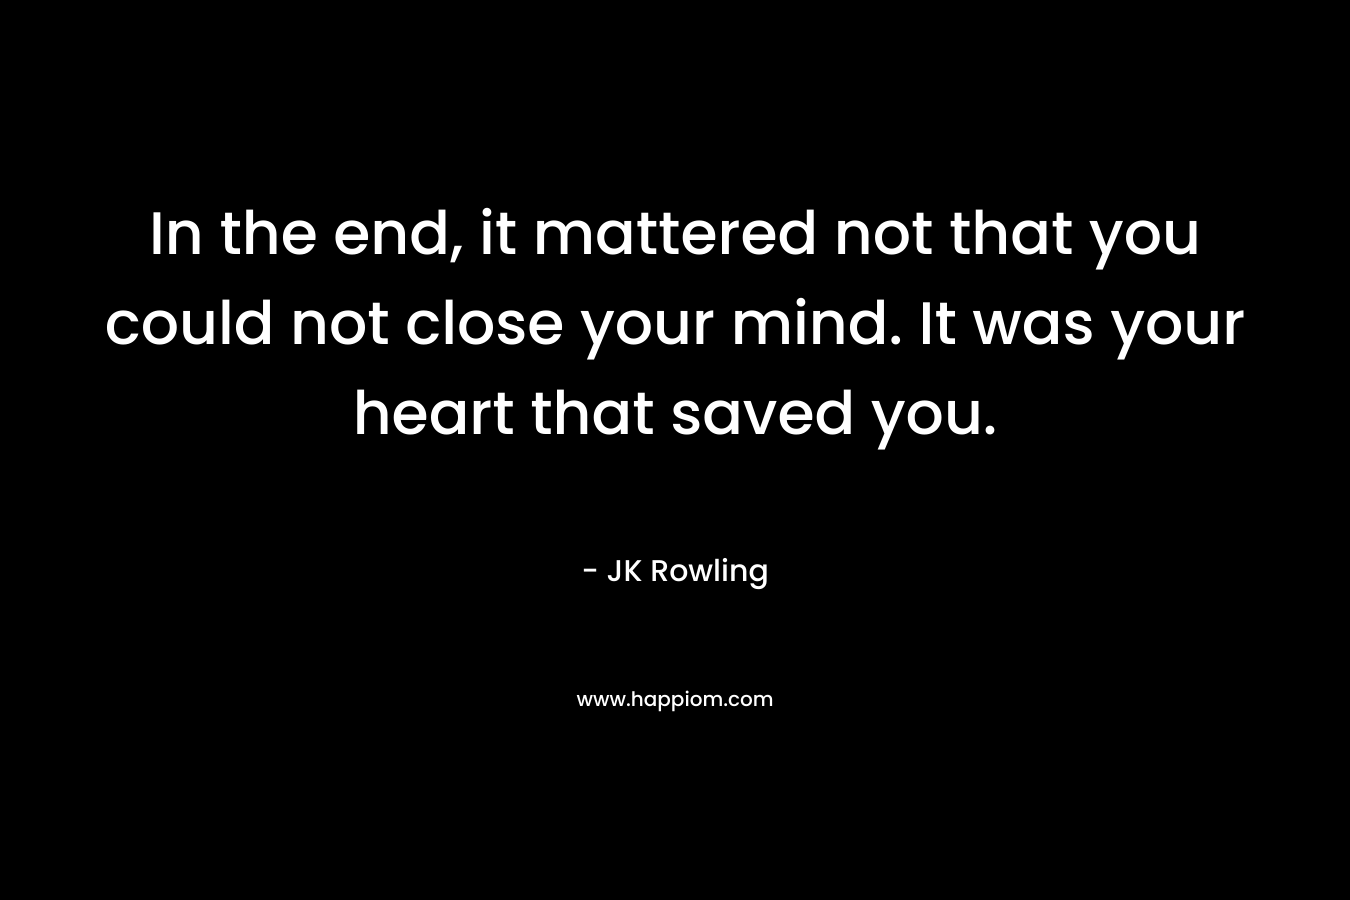 In the end, it mattered not that you could not close your mind. It was your heart that saved you. – JK Rowling